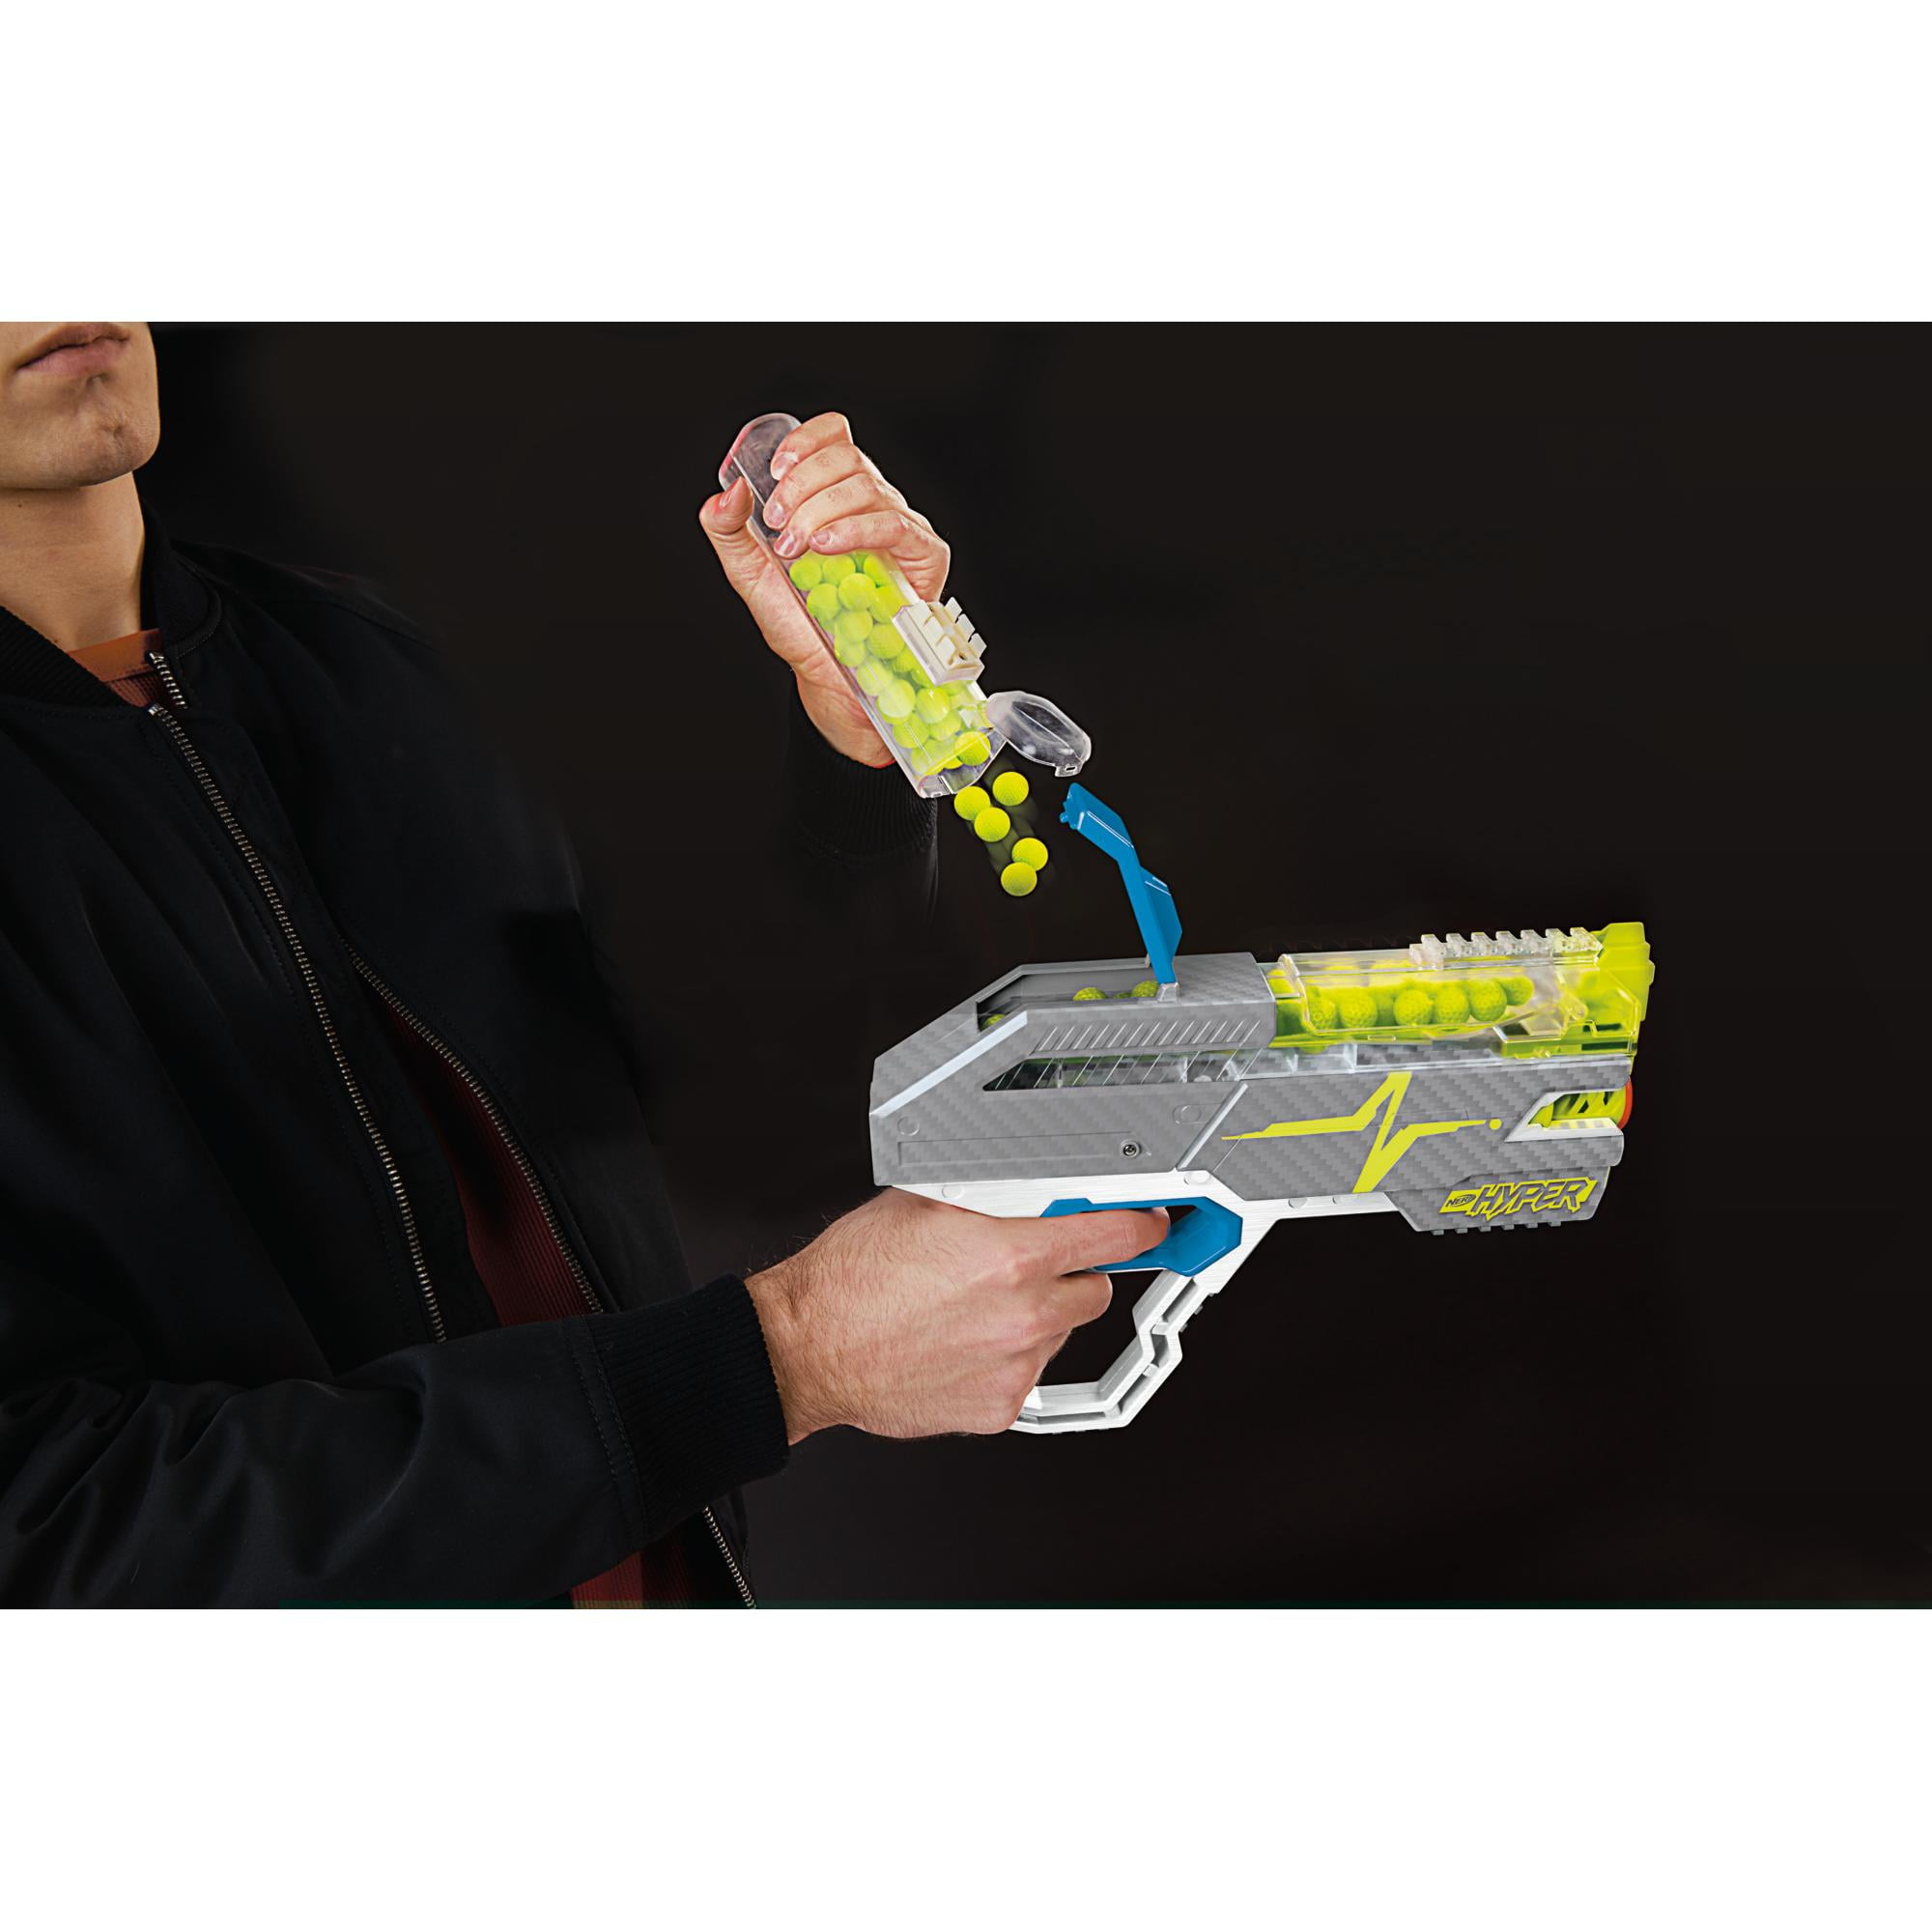 NERF Hyper Rush-40 Pump-Action Blaster, 30 Hyper Rounds, Eyewear, Up to 110  FPS Velocity, Easy Reload, Holds Up to 40 Rounds